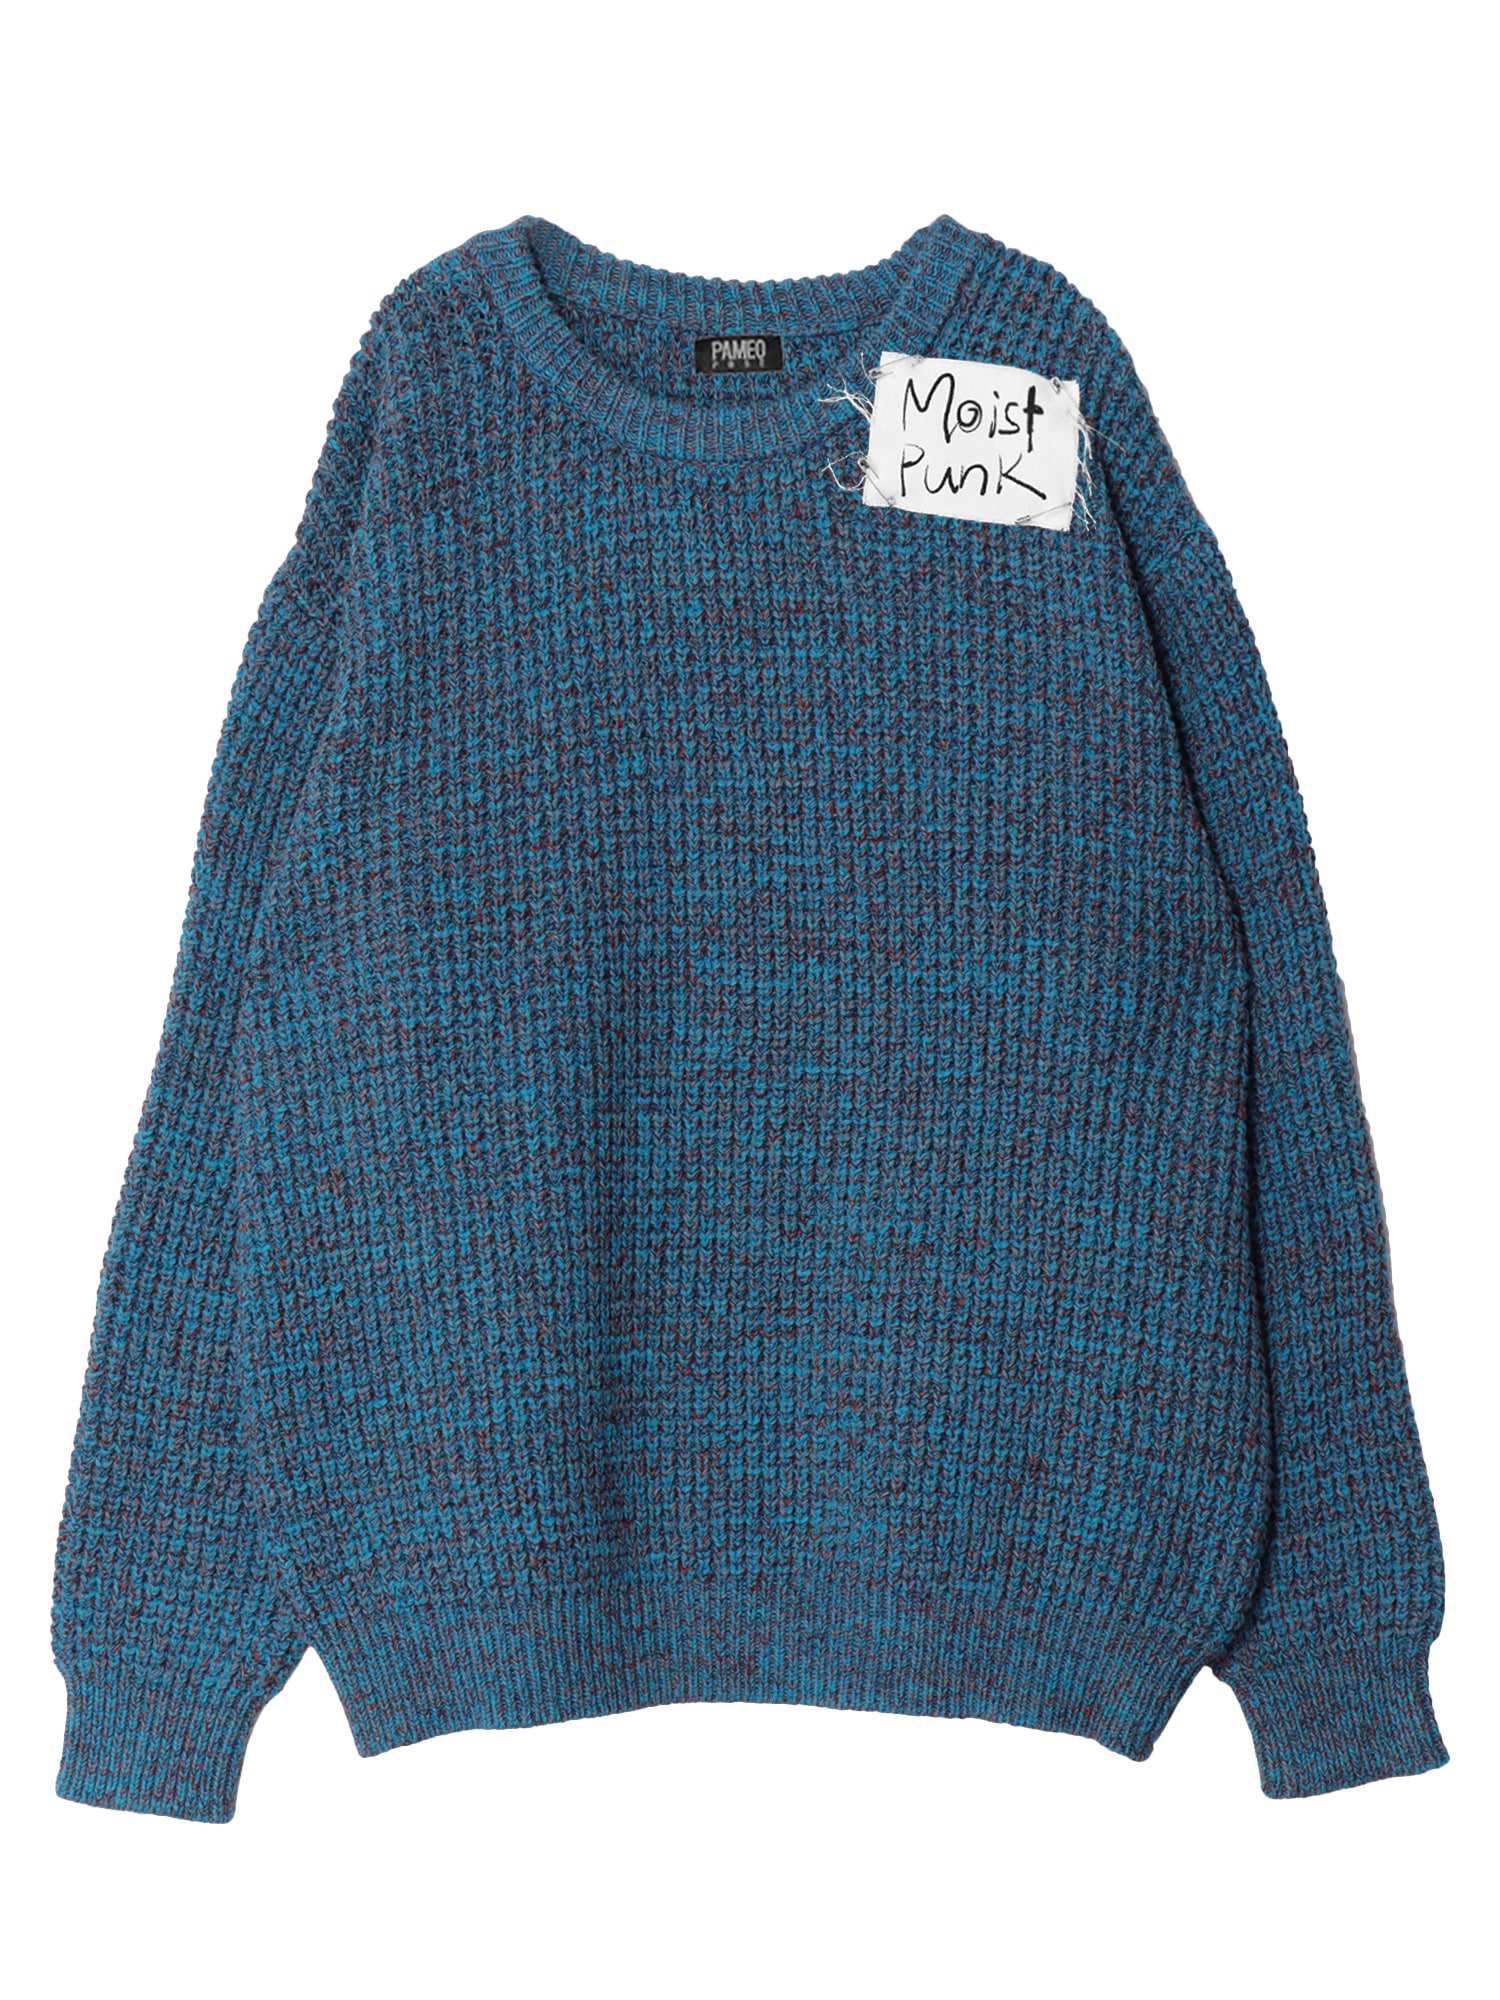 1978 Sweater(F ブラック)｜ PAMEO POSE｜渋谷PARCO | ONLINE PARCO